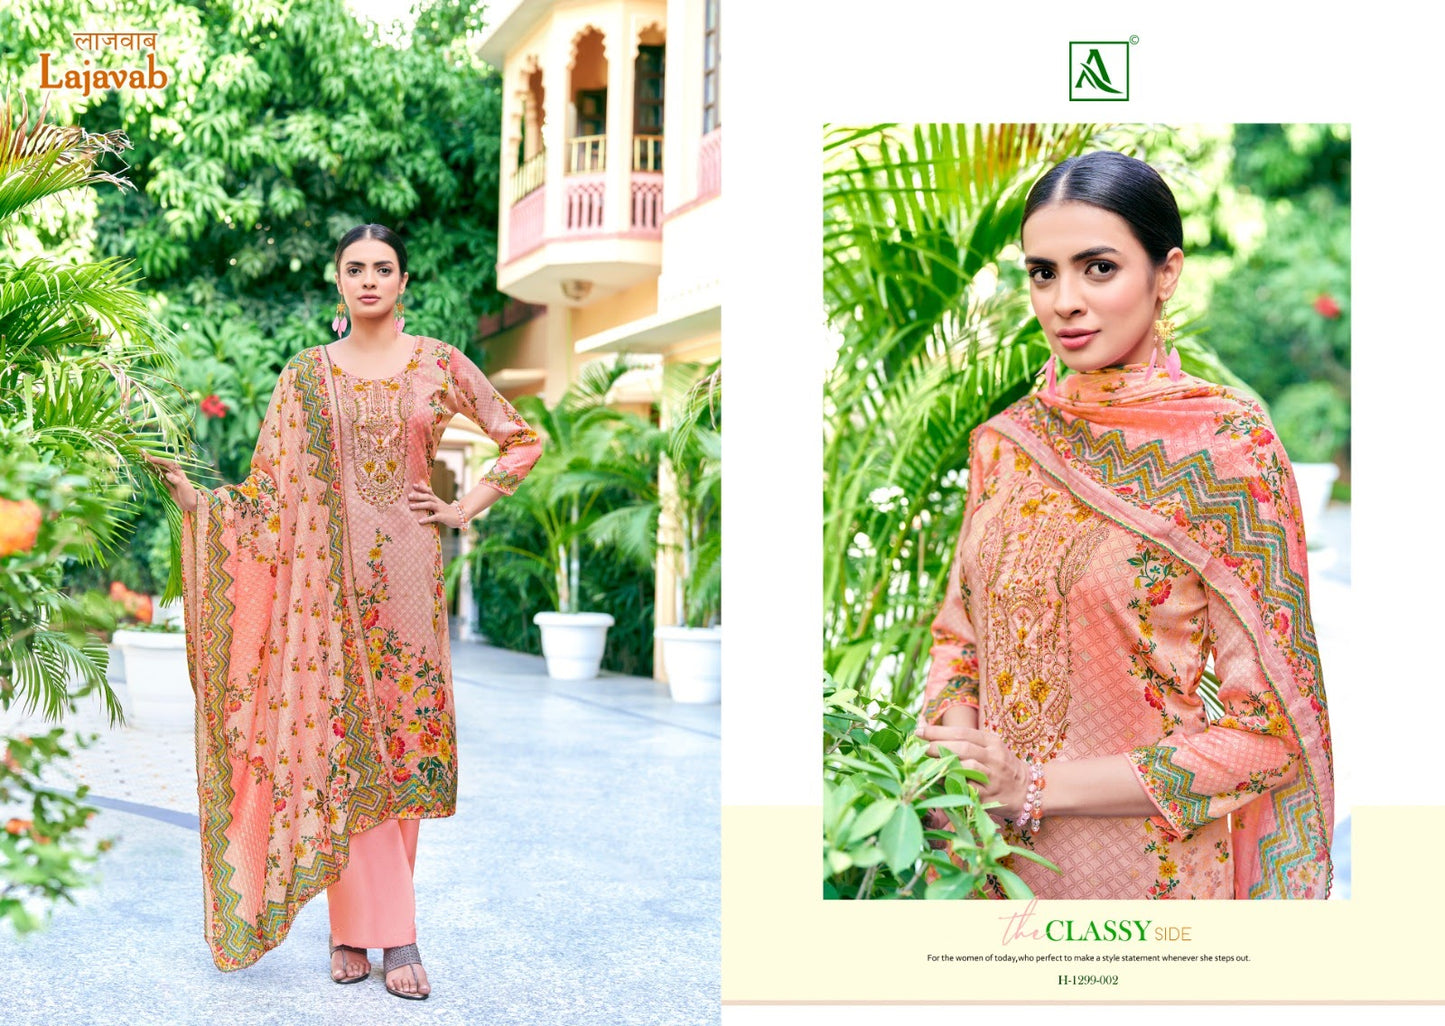 Lajavab Alok Jaam Cotton Plazzo Style Suits